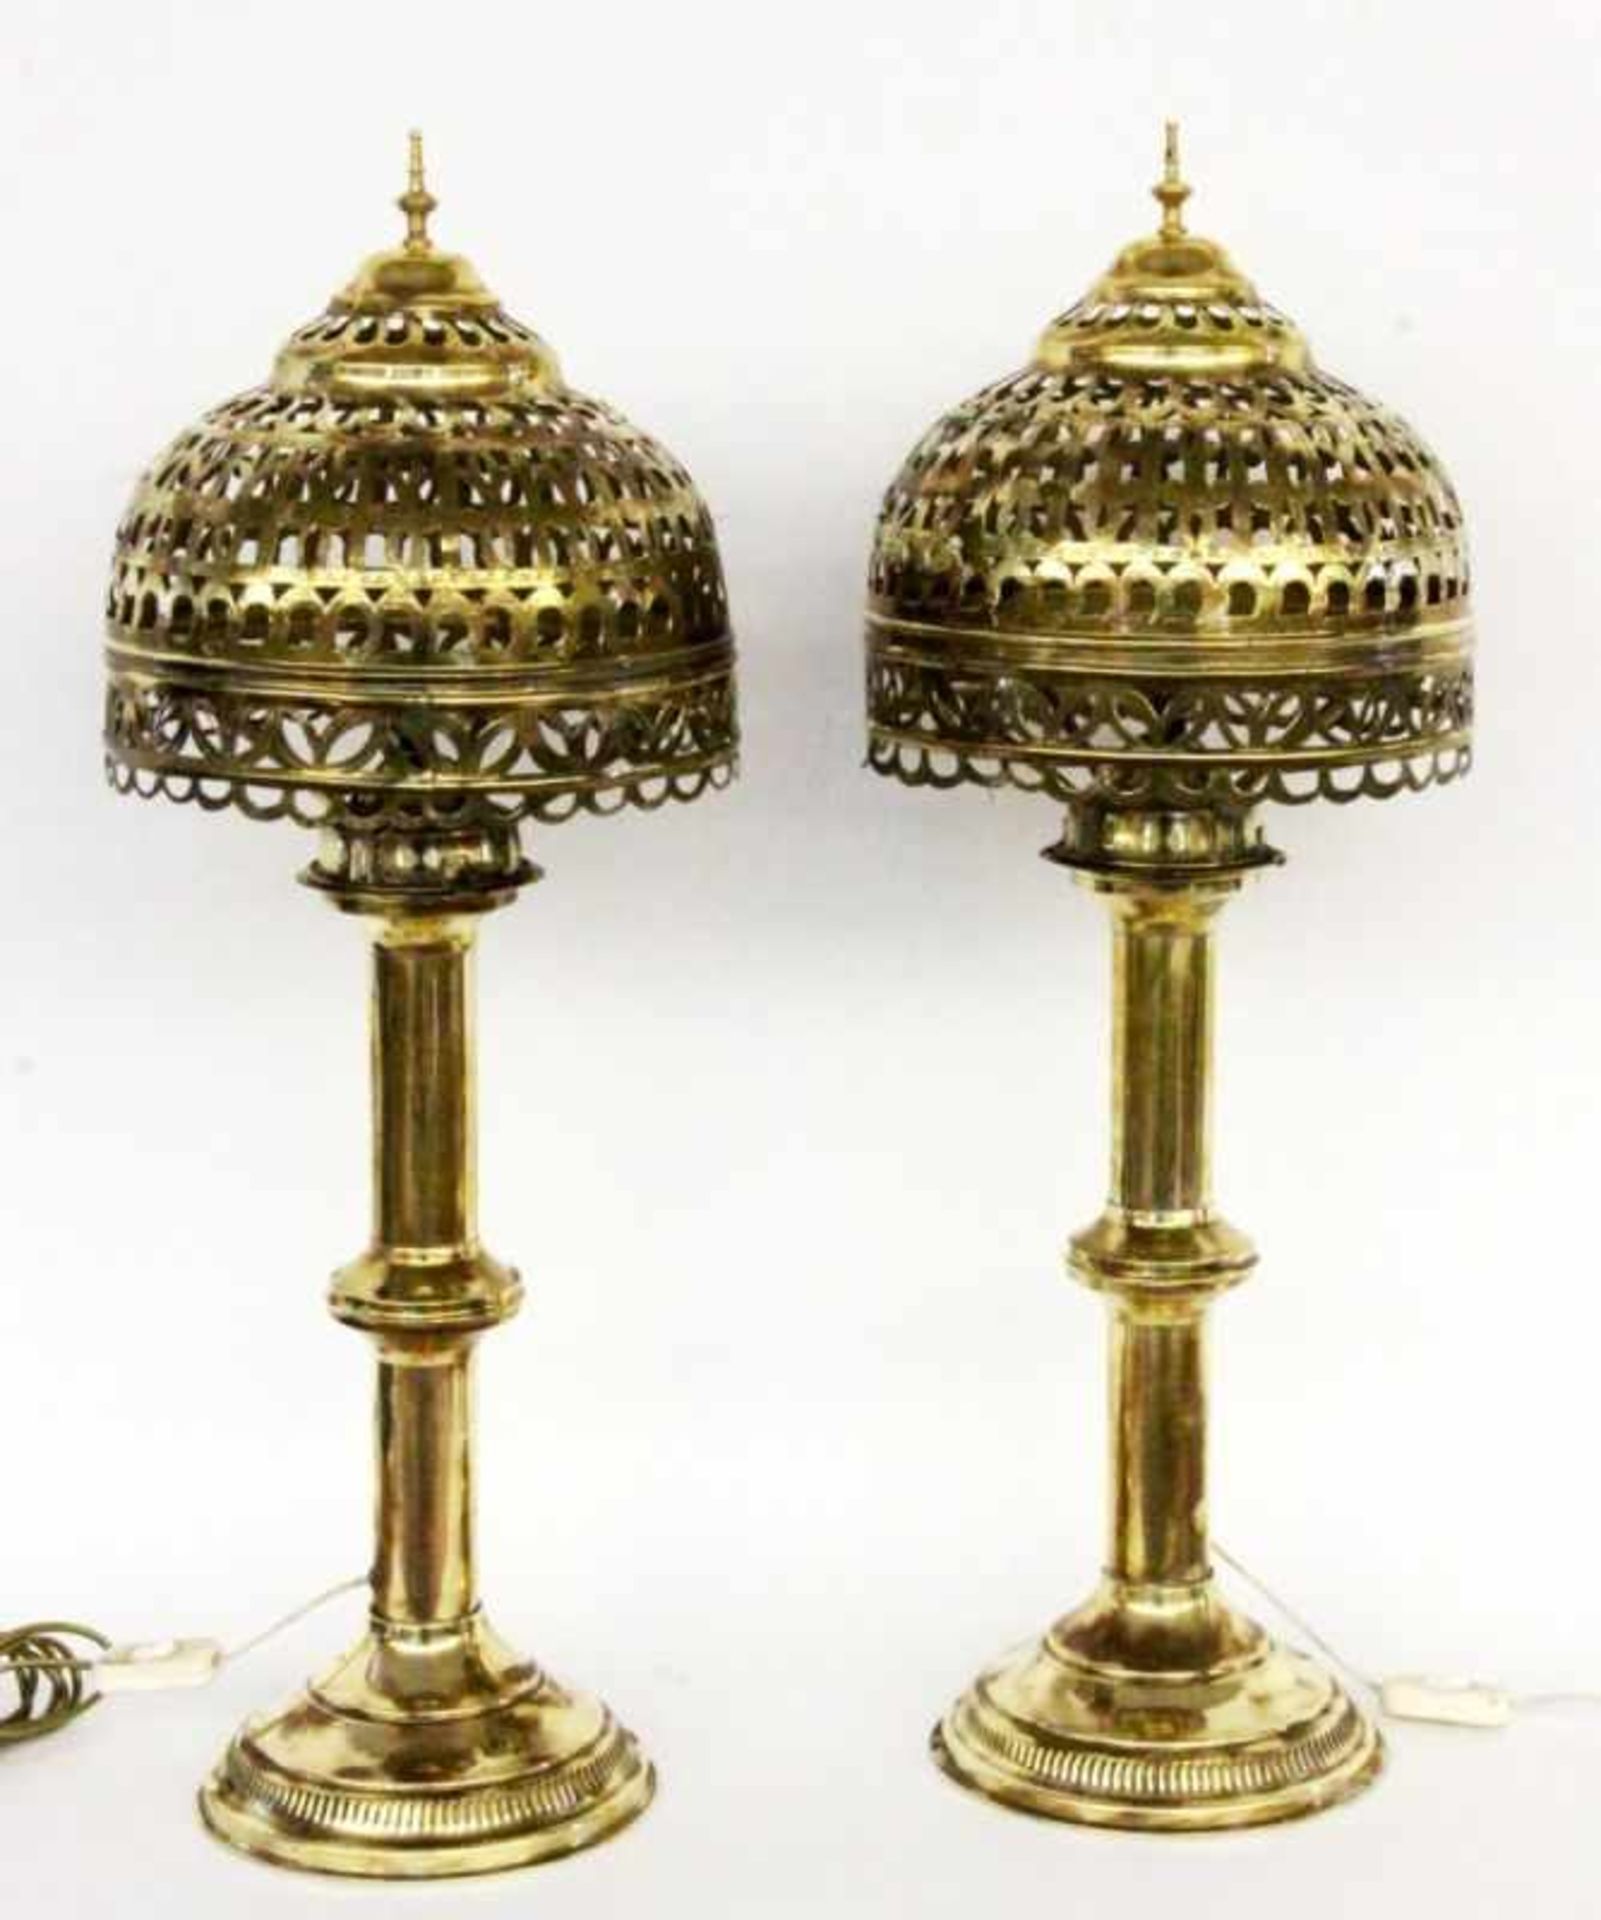 A PAIR OF TABLE LAMPS IN ORIENTAL STYLE Brass, electrified. 75 cm highPAAR TISCHLAMPEN IM